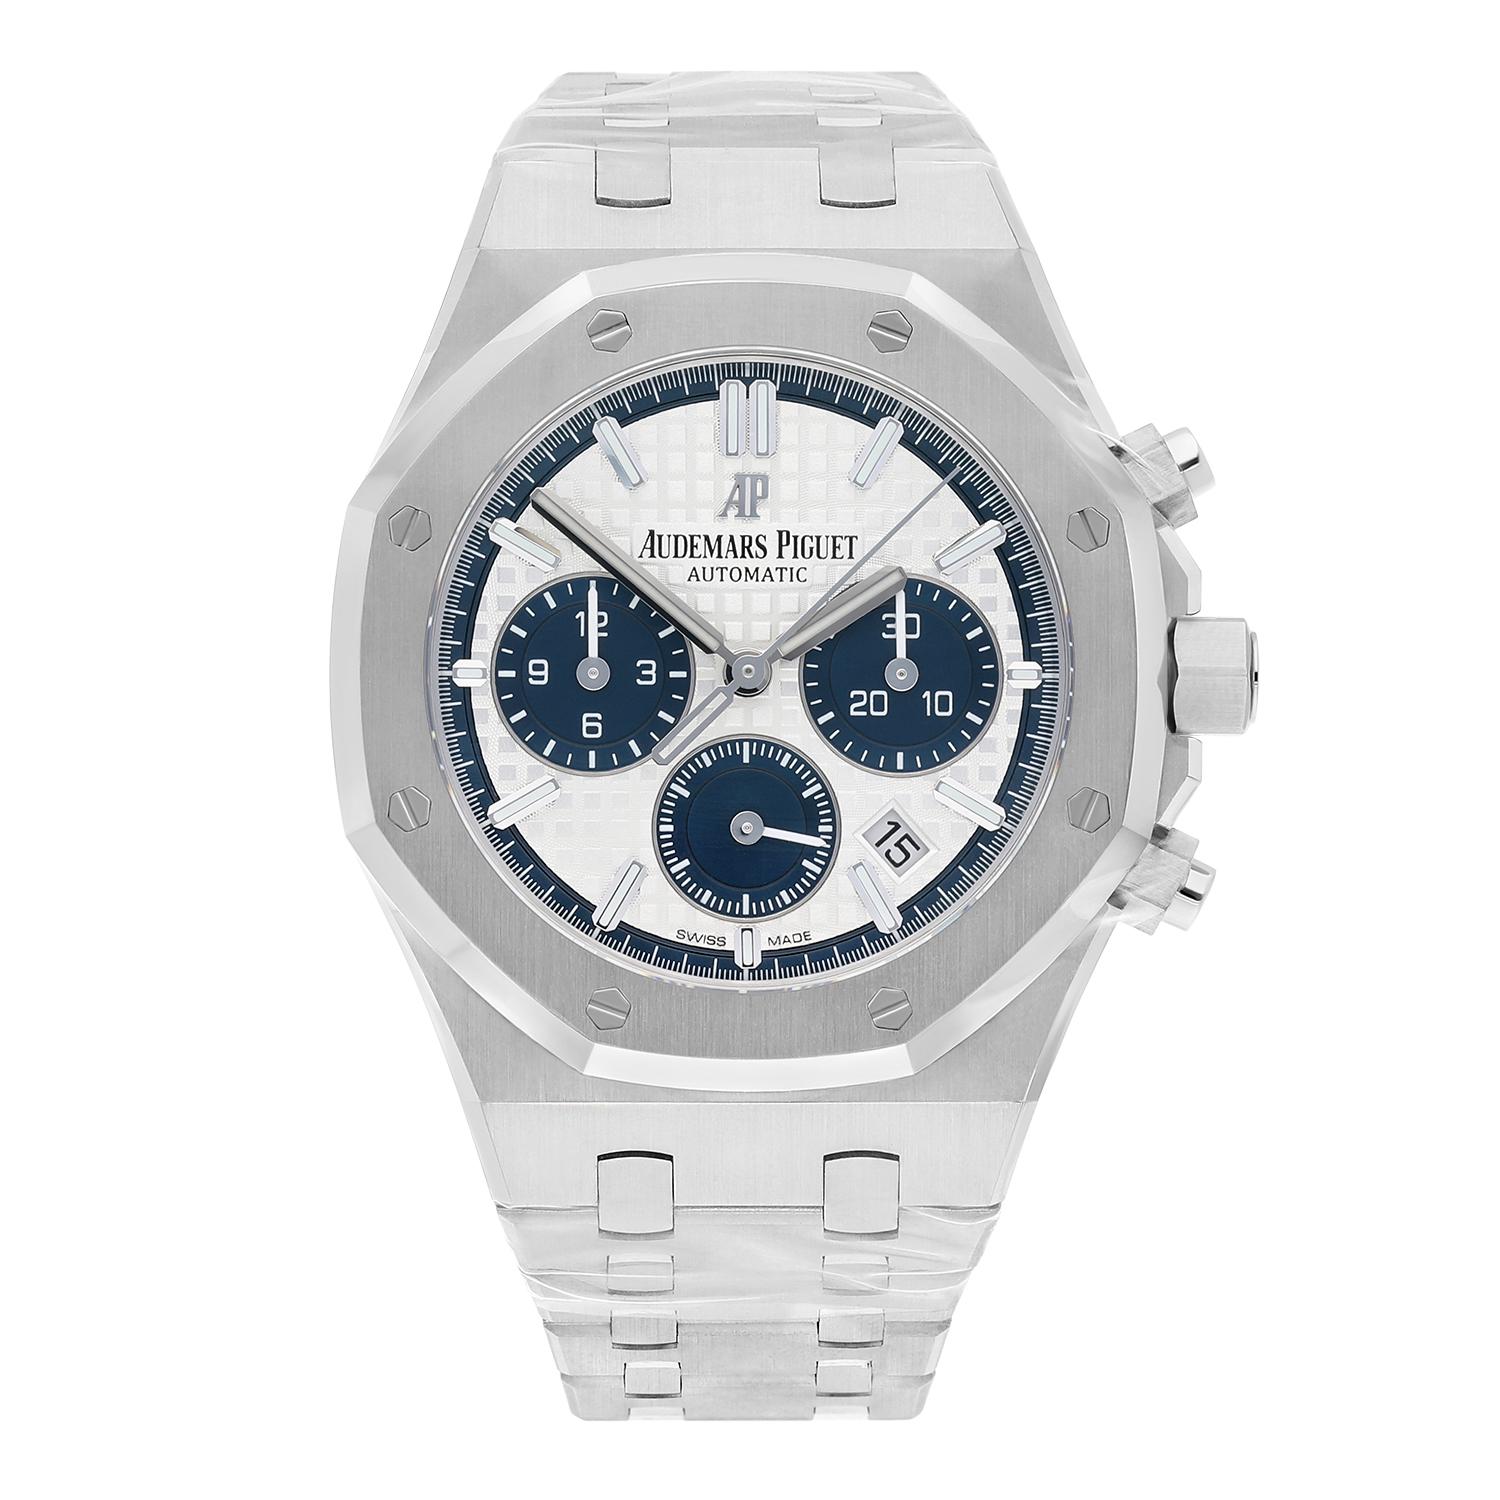 Introducing the stunning Audemars Piguet Royal Oak Chronograph 38 wristwatch, a true masterpiece of luxury and precision. Crafted with a solid stainless steel caseback and bracelet, this unisex watch boasts a fixed stainless steel bezel and silver